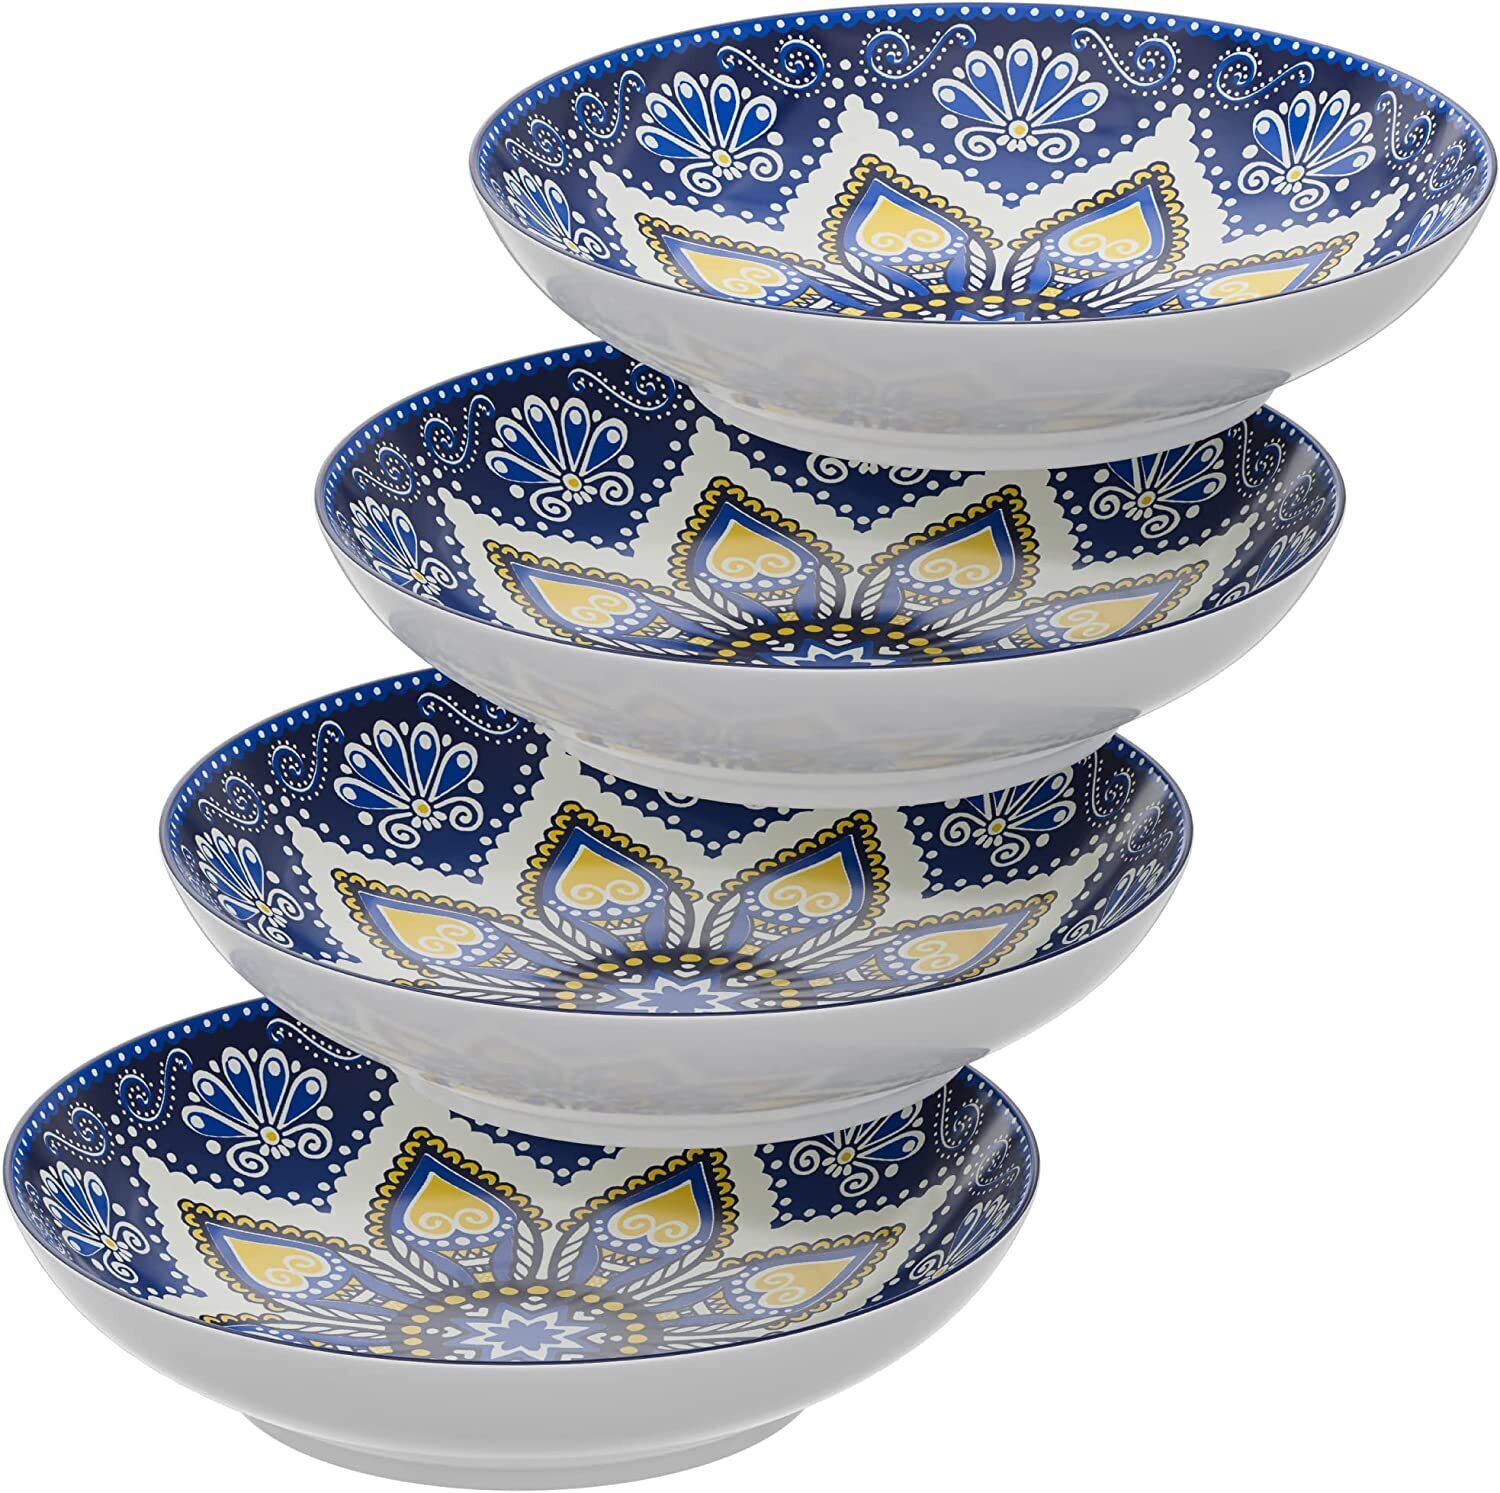 American Atelier Pasta Bowls | Set of 4 Large, 9-inch - Blue & Yellow Medallion